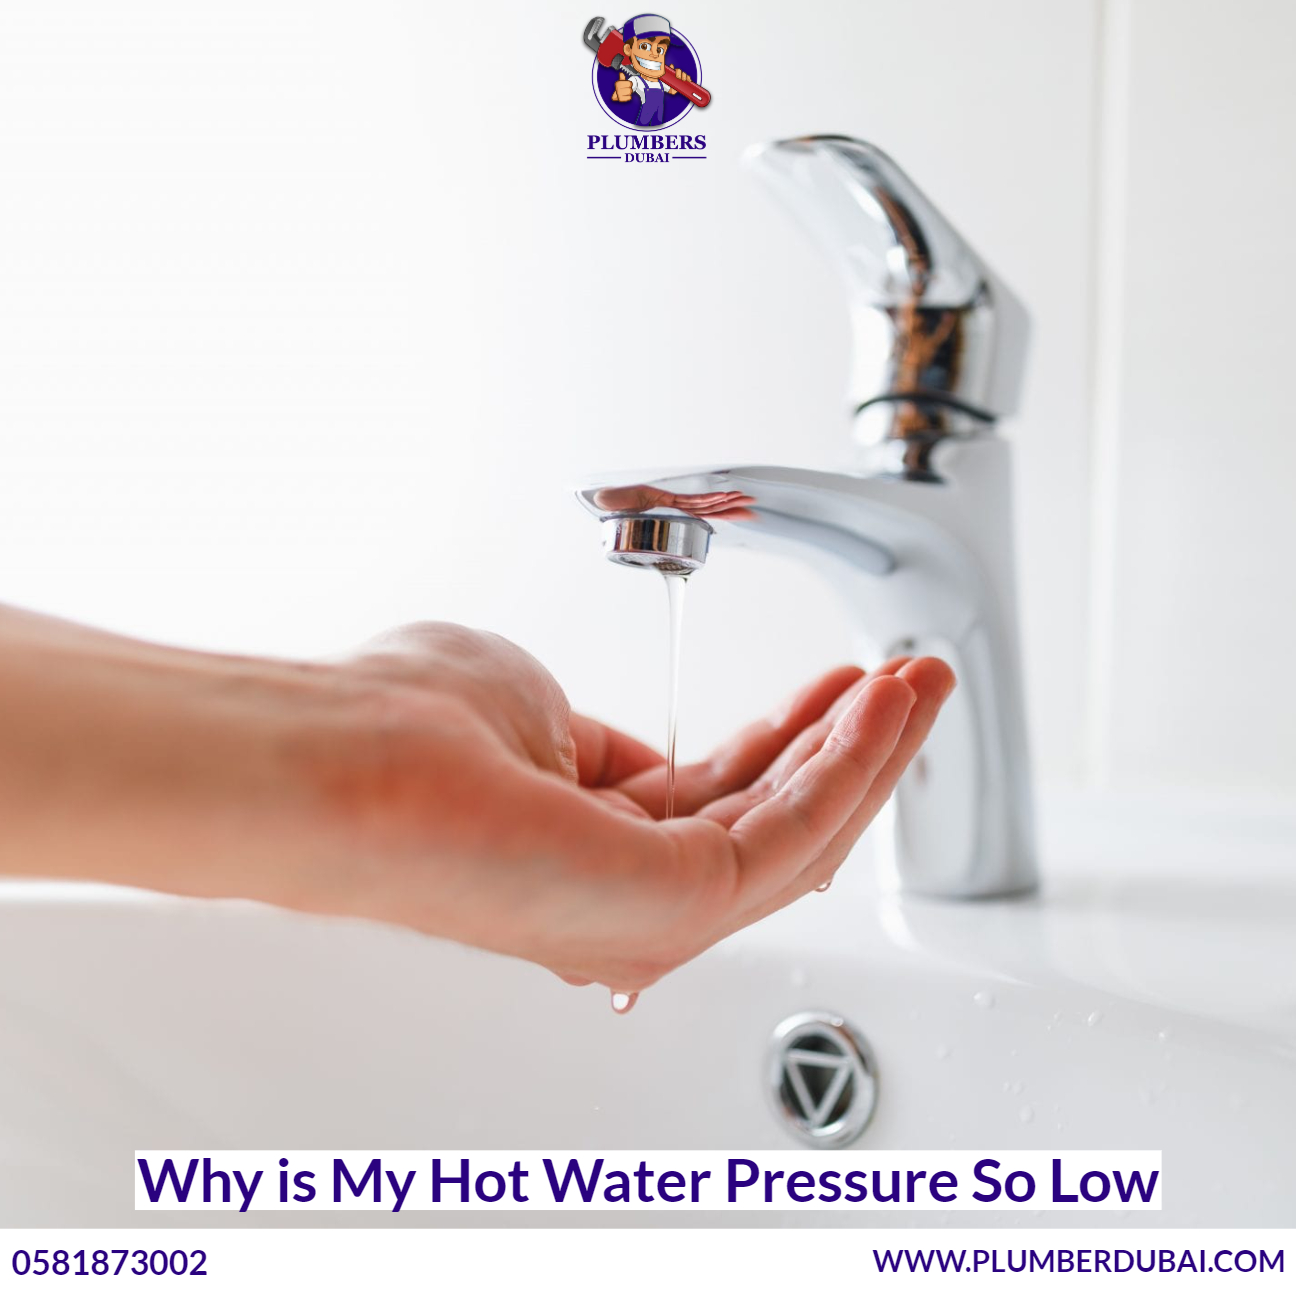 Why is My Hot Water Pressure So Low